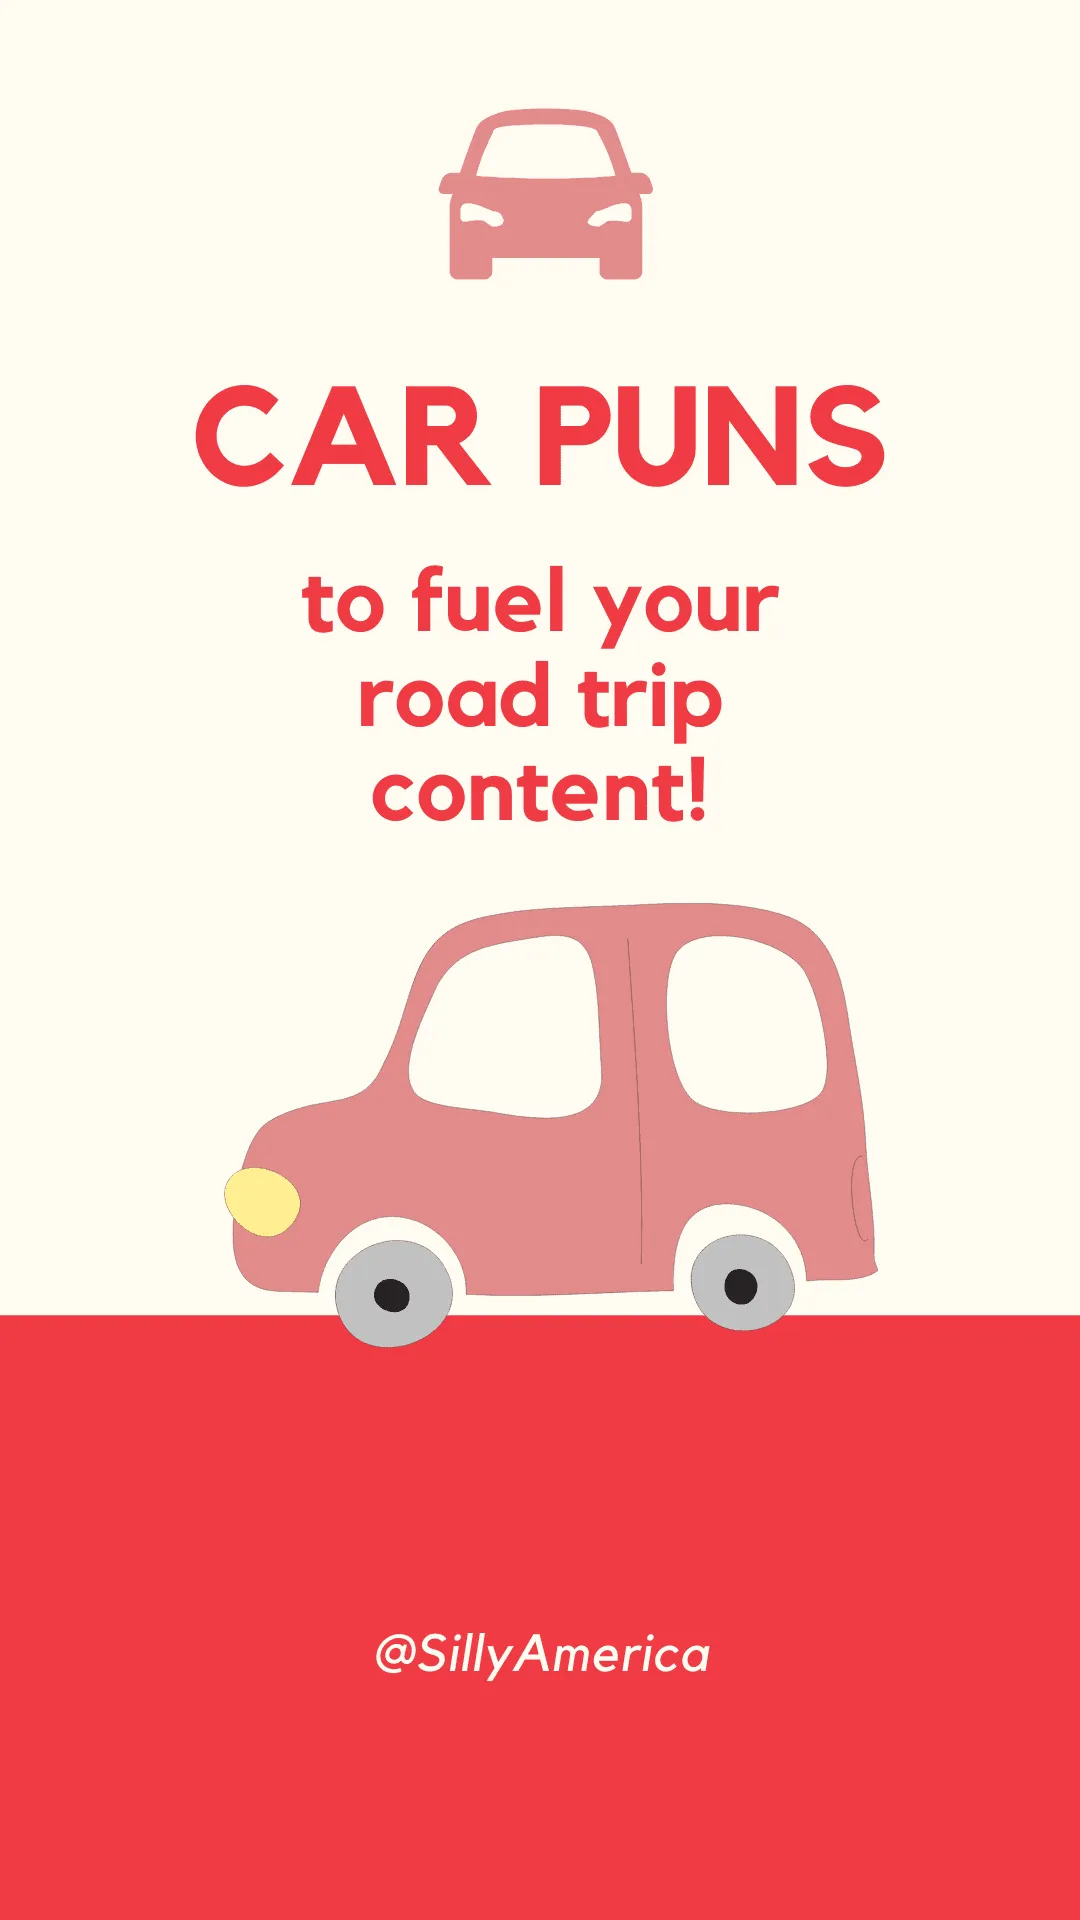 Putting together a list of funny car puns was EXHAUSTING! But it was worth it knowing these ideas will FUEL your road trip content! If you're looking for the best car puns to use as captions for Instagram, in articles or blog posts, or on other social media posts, these dad-joke worthy wordplays are for you! Reach for the CARS and keep scrolling to use these fun car puns as Instagram captions for your travel photos or just to have a good chuckle. #Puns #InstagramContent #Car #CarPuns #Cars